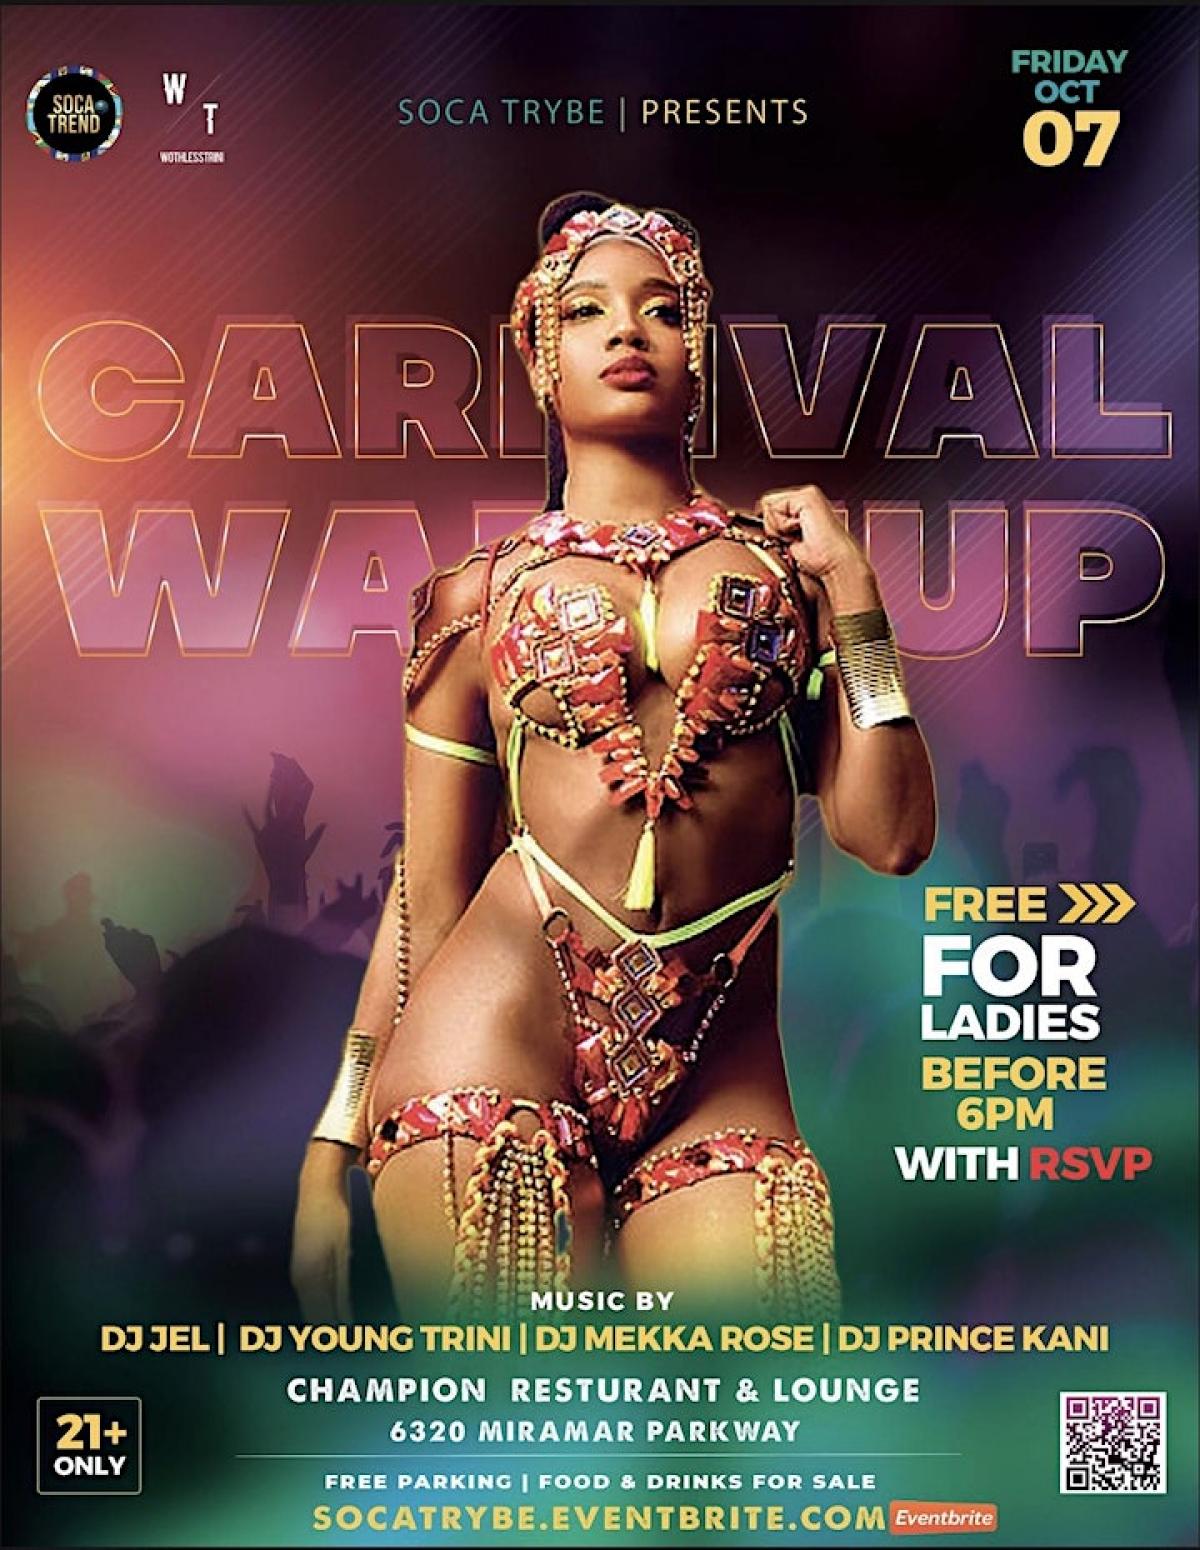 Carnival Warm Up  flyer or graphic.